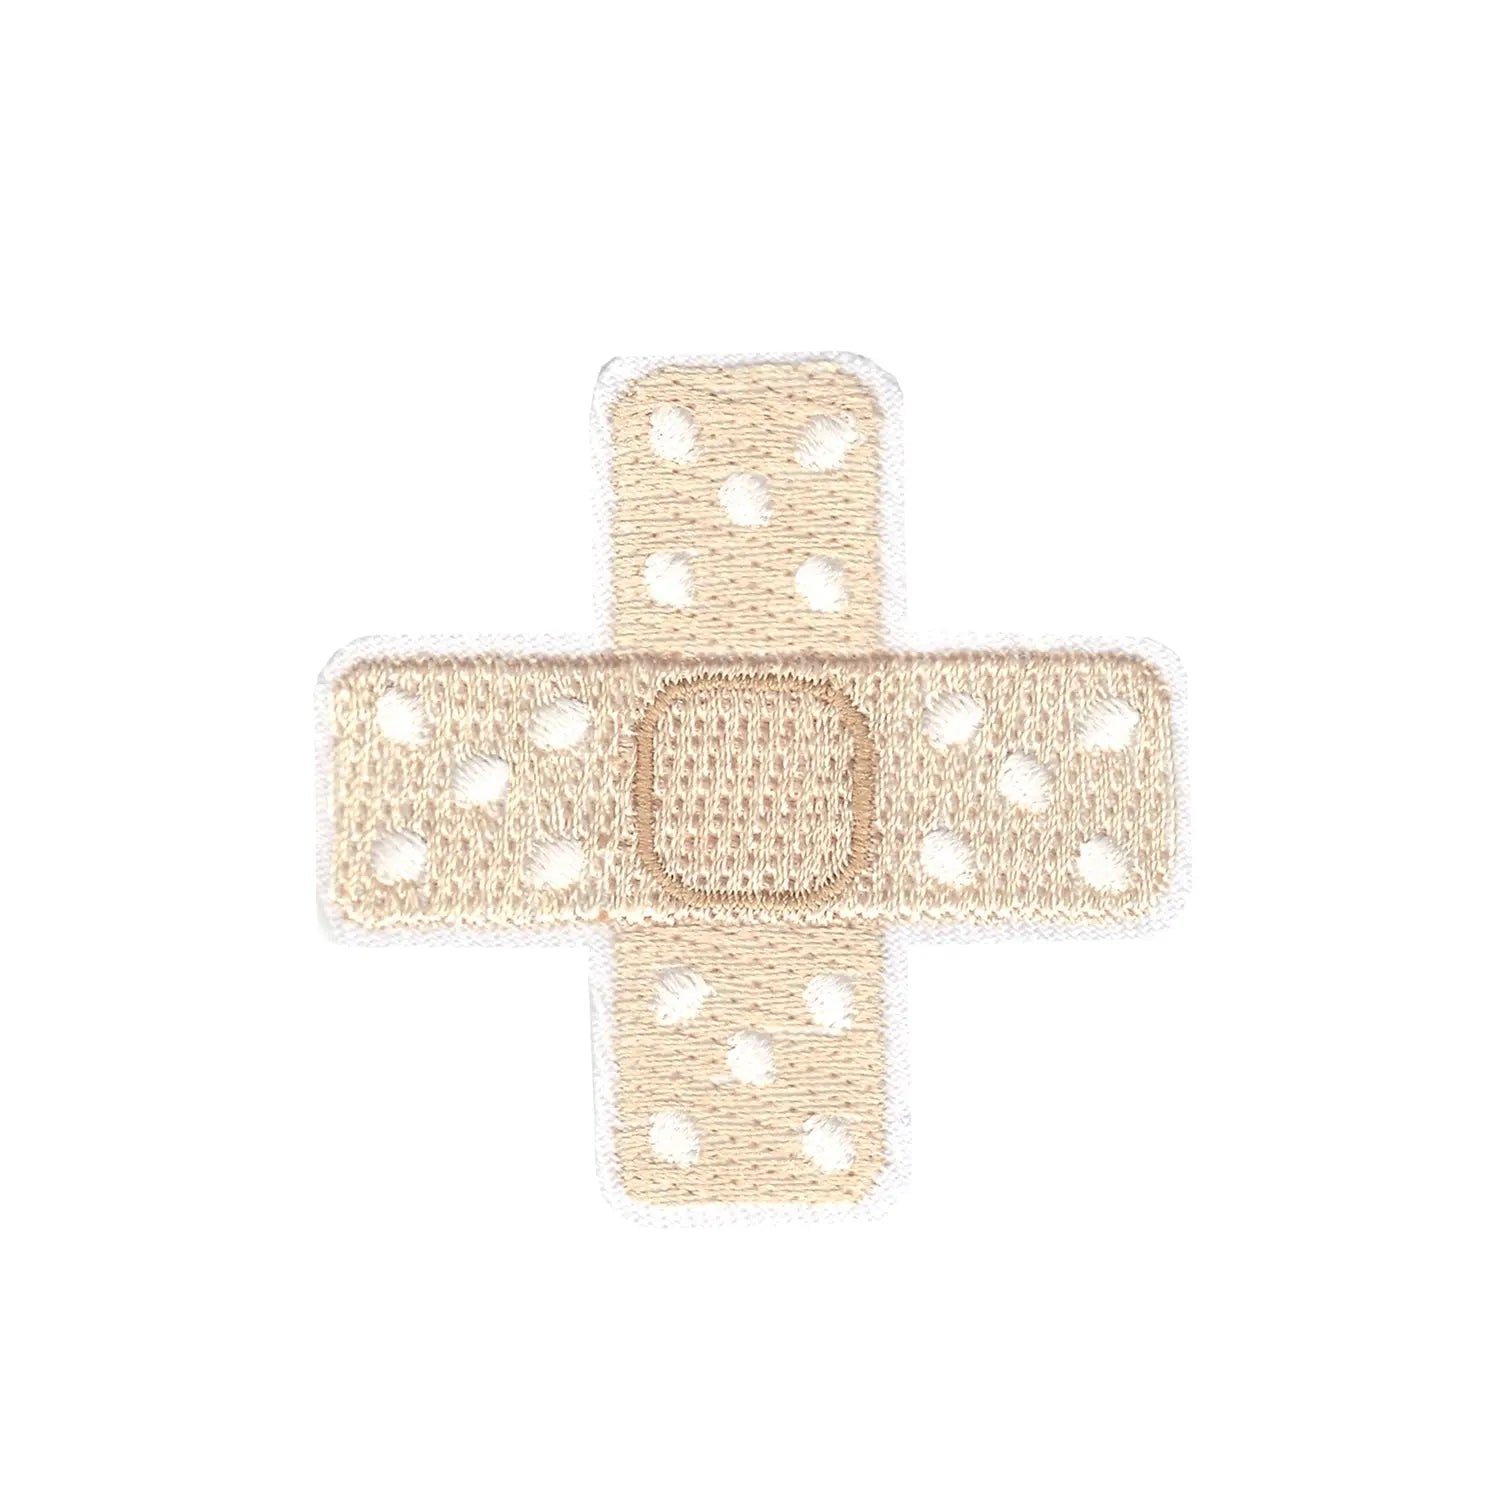 Band-Aid Emoji Iron On Embroidered Patch 